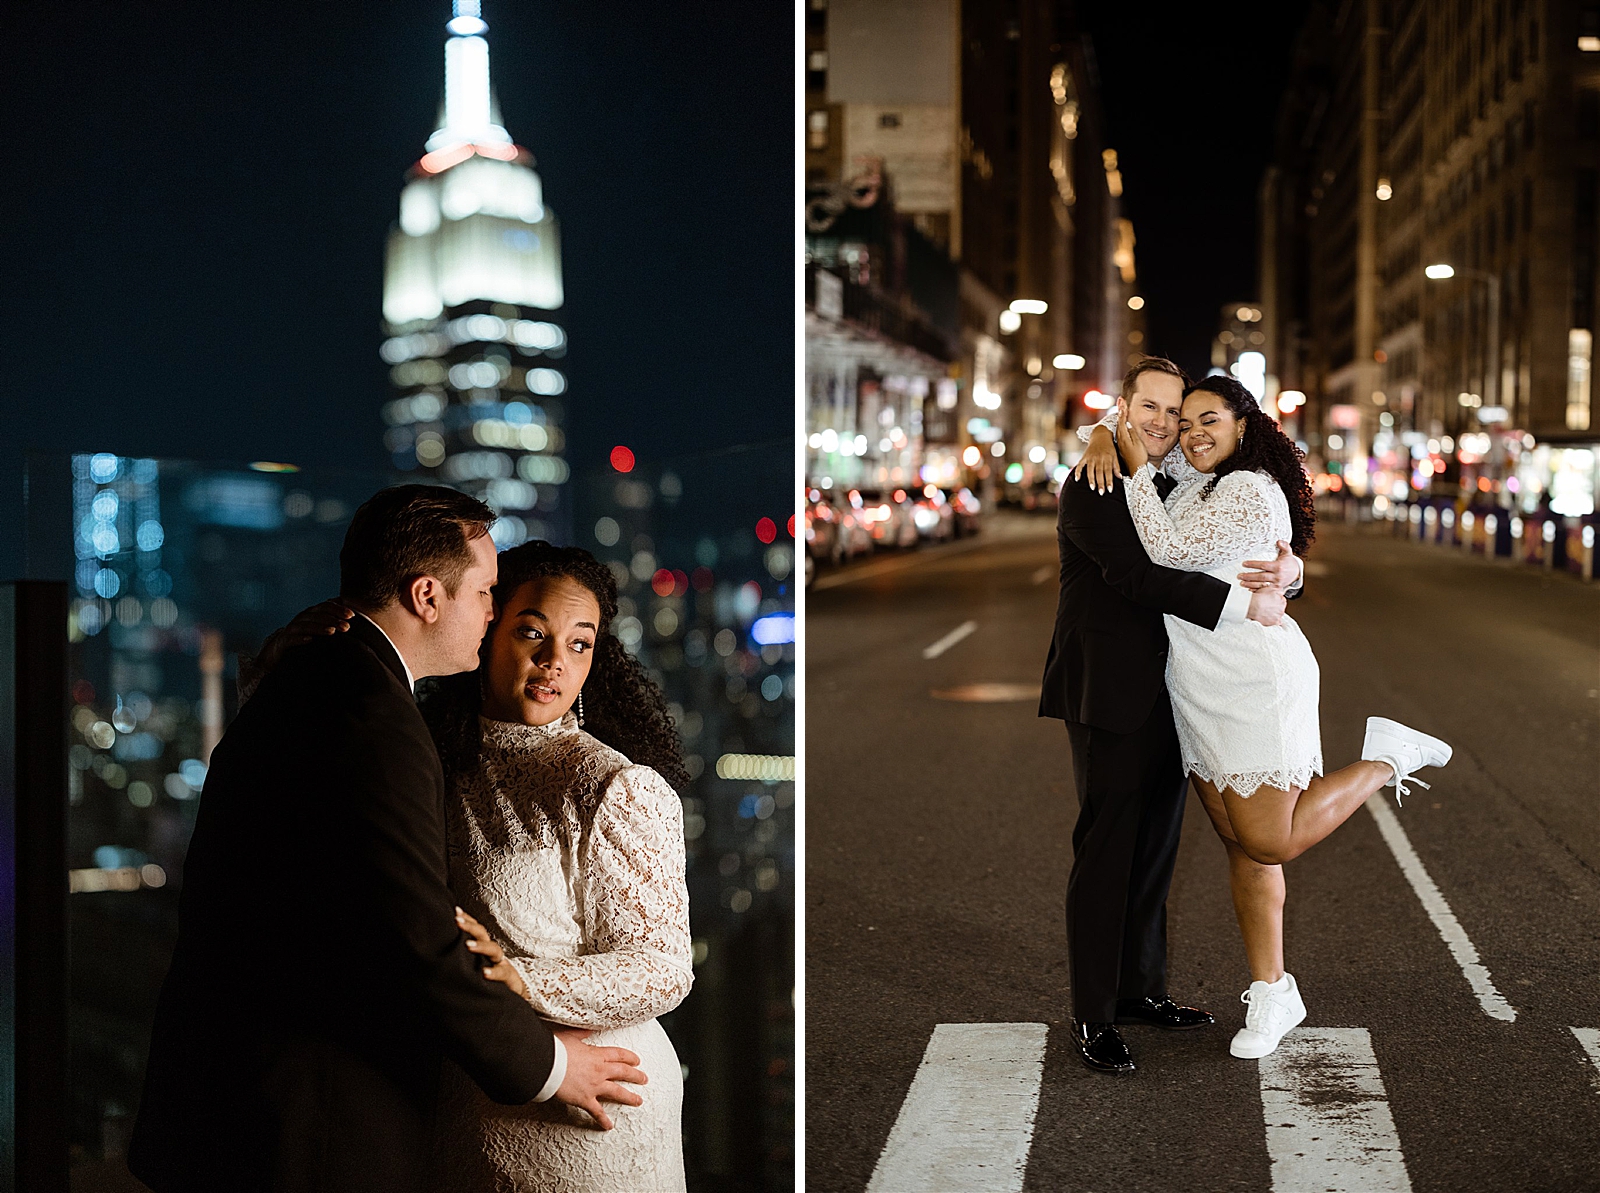 Left photo: Bride and Groom embracing in front of a NYC nighttime skyline.
Right photo: Bride and Groom embracing in the middle of a New York City Street. 